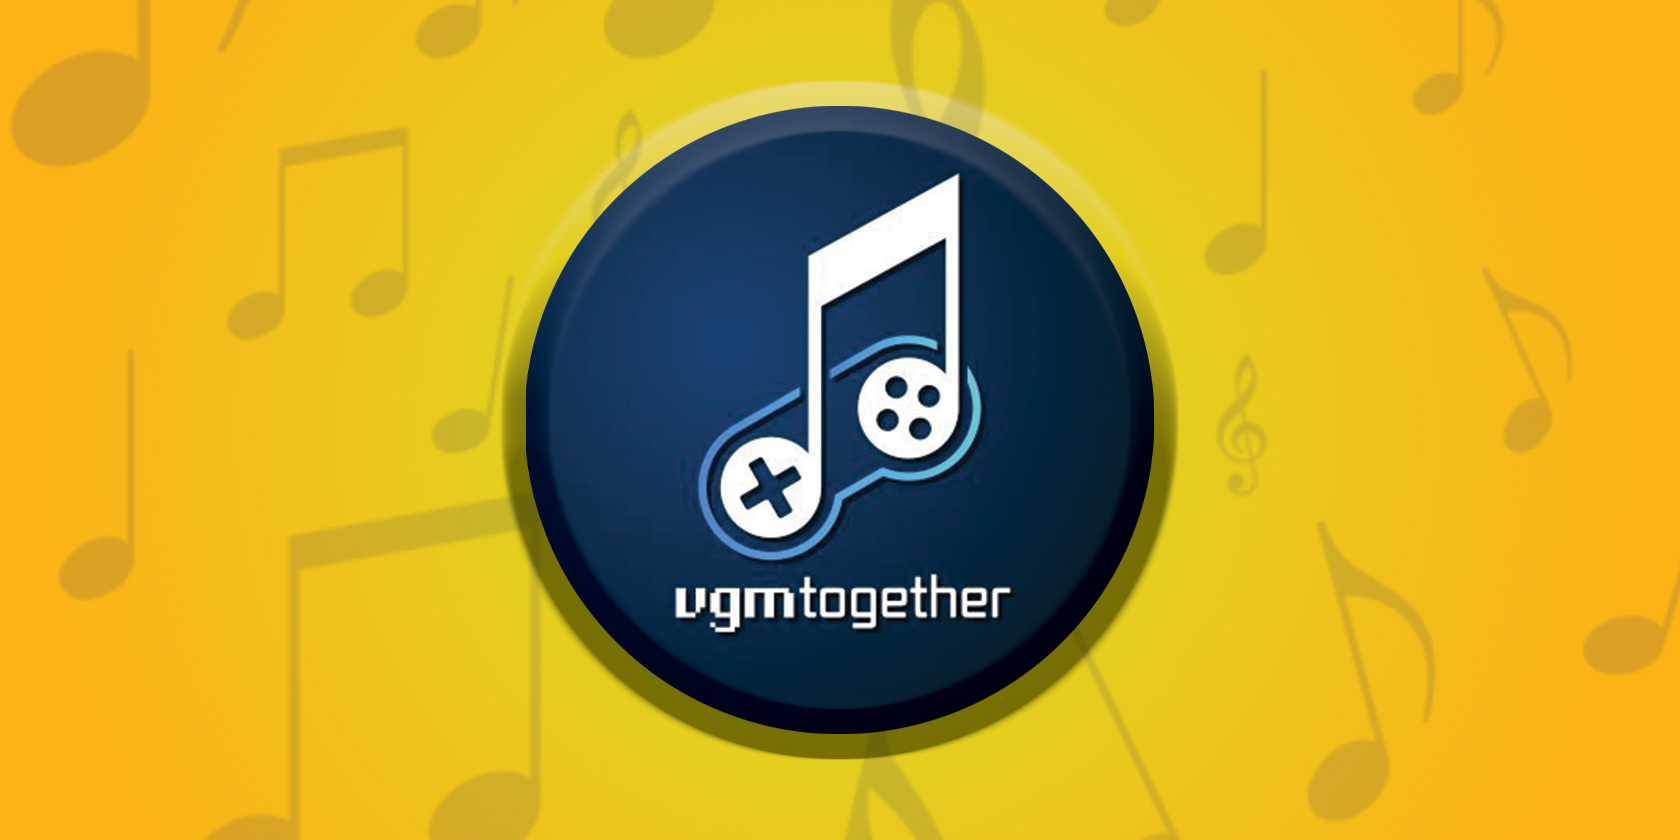 VGMtogether video game music event logo yellow background